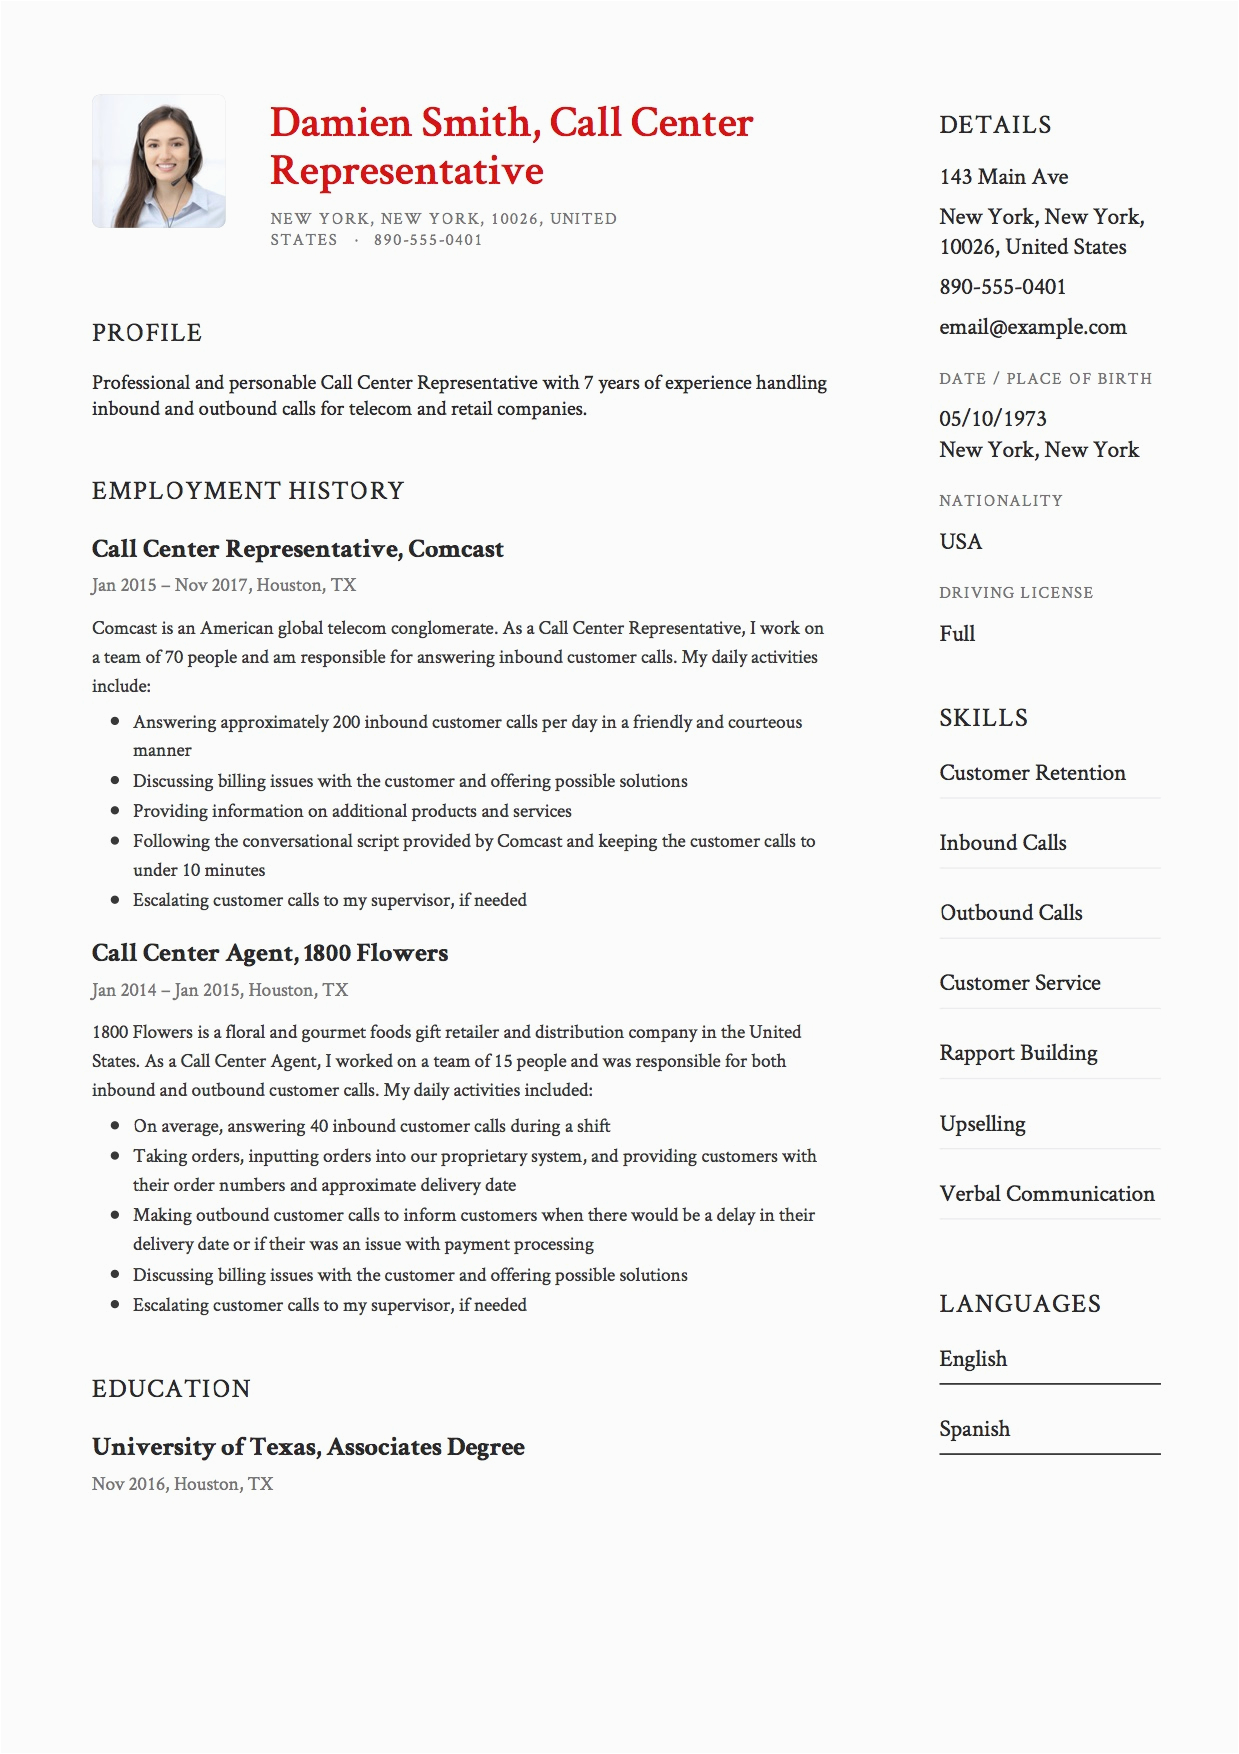 Sample Resume for Customer Service Representative Call Center Call Center Customer Service Resume Examples 2018 Best